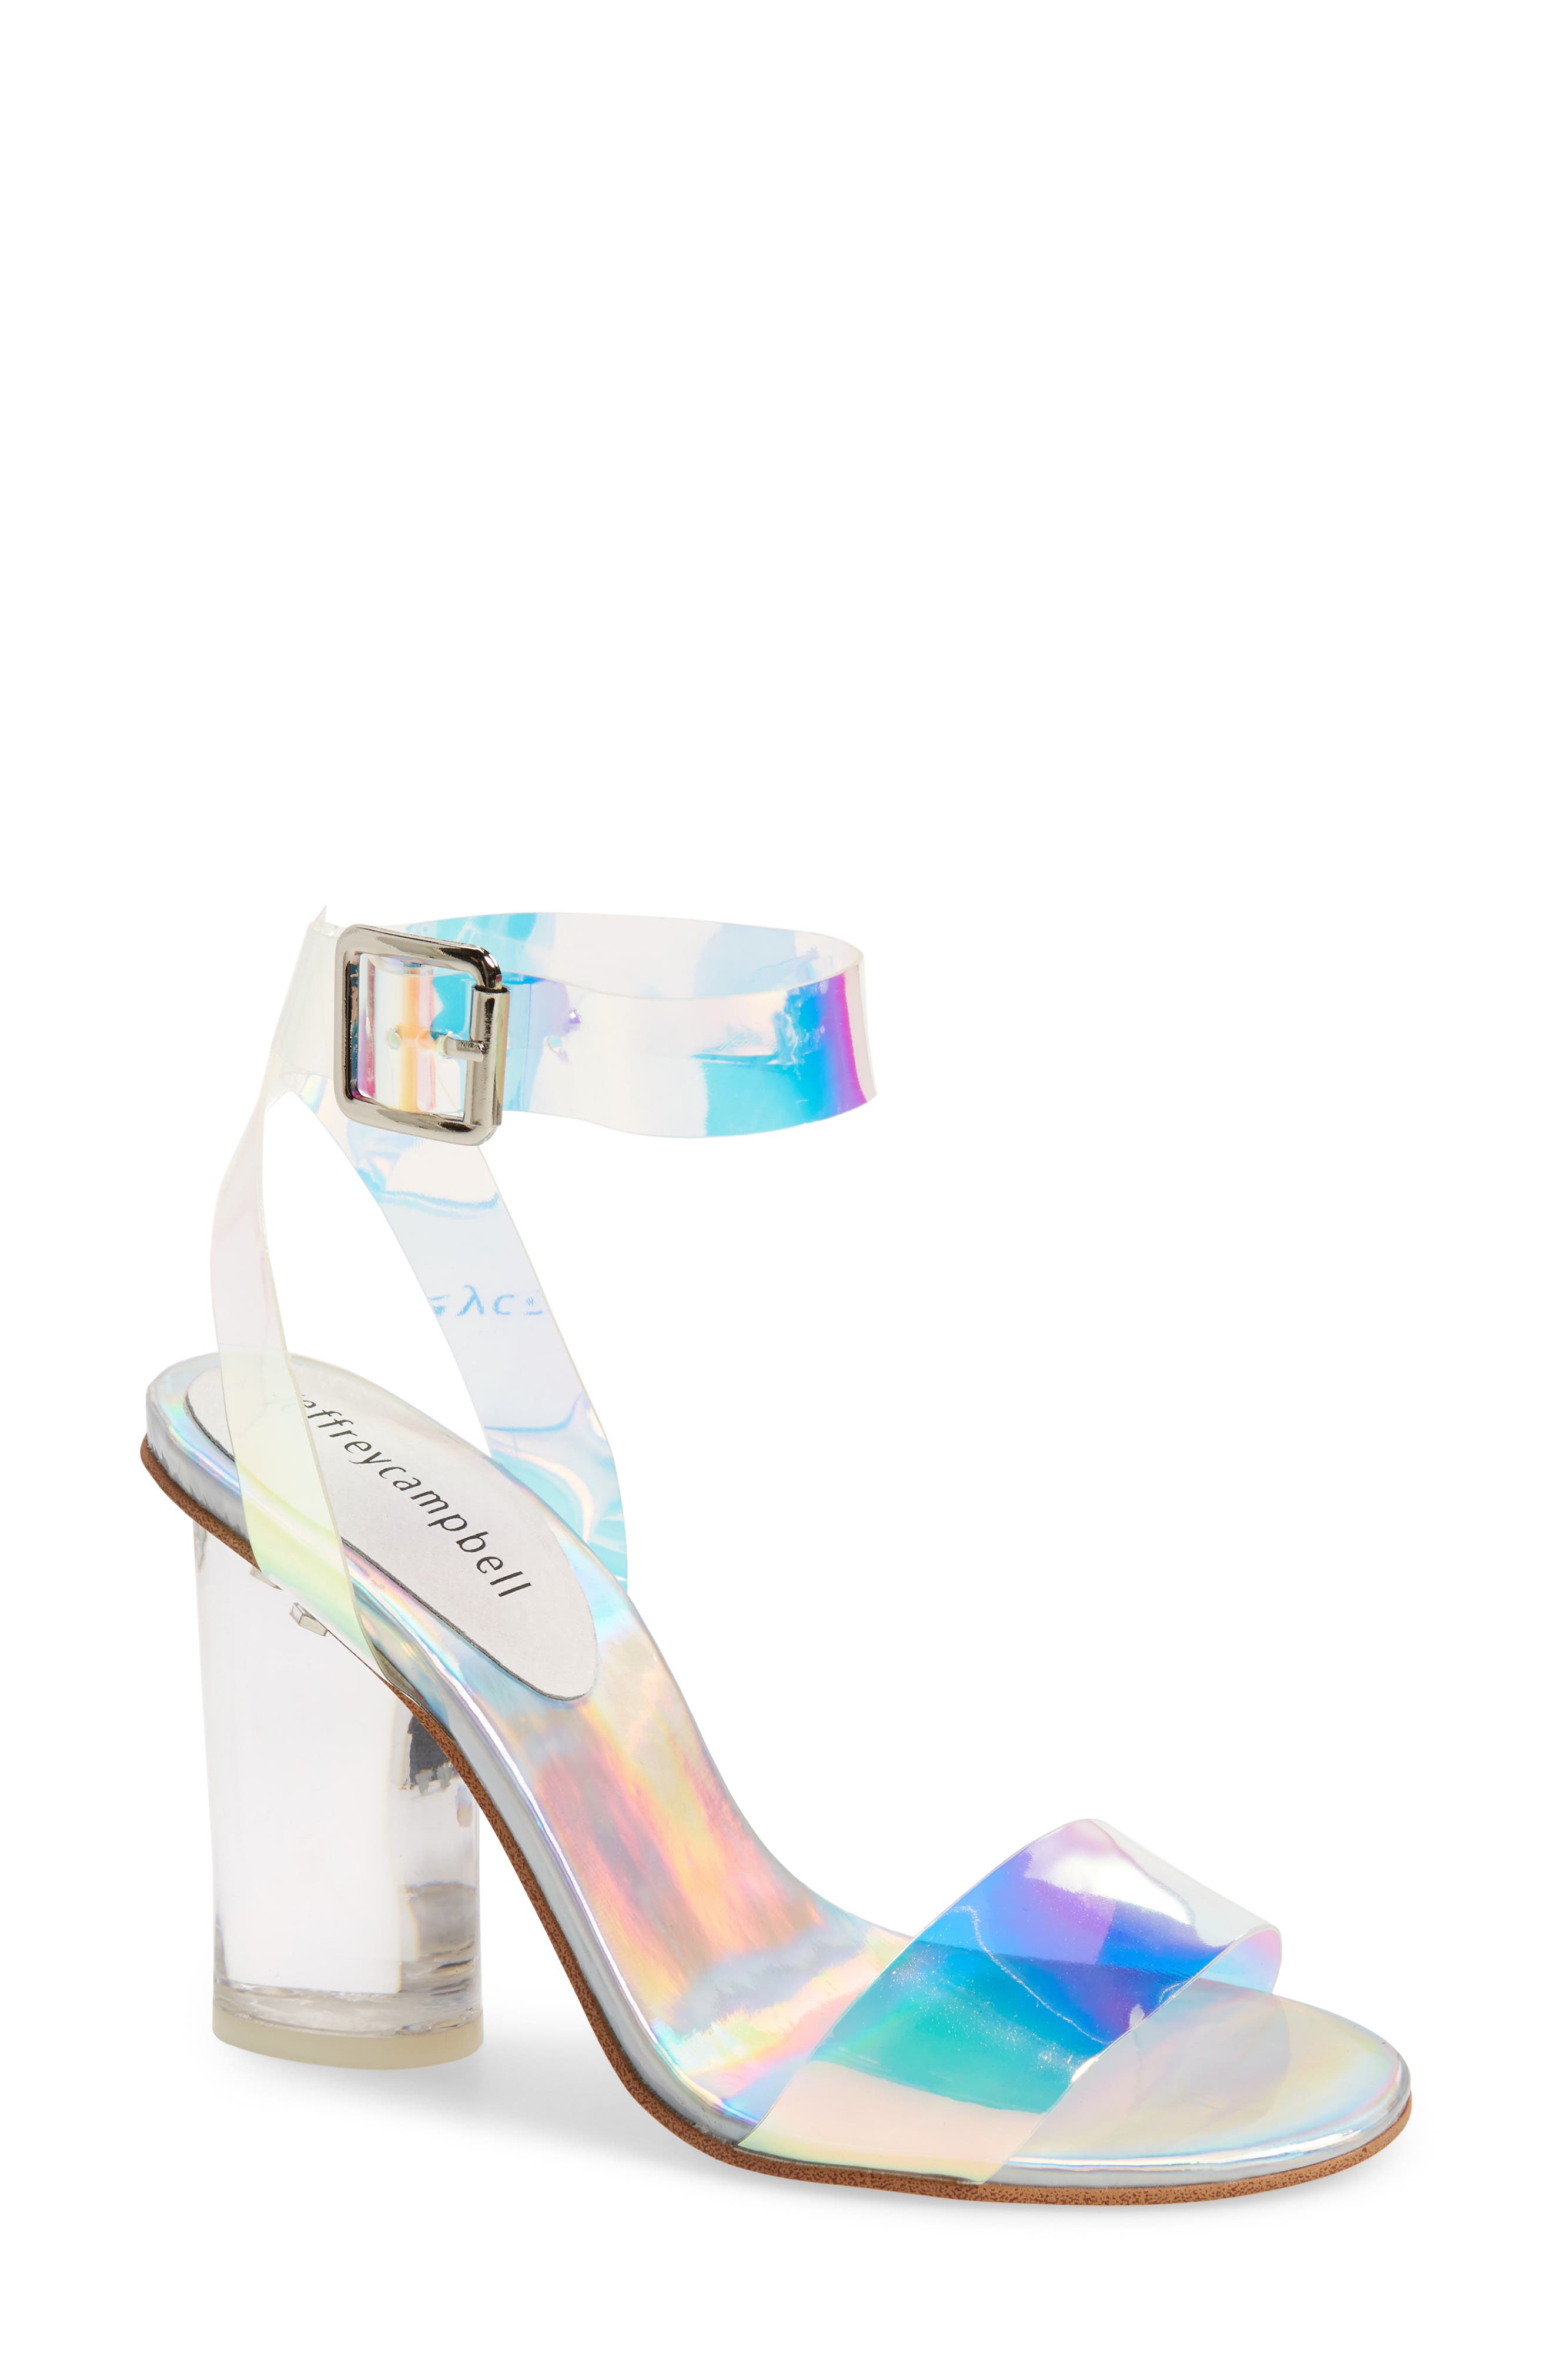 jeffrey campbell clear sneakers